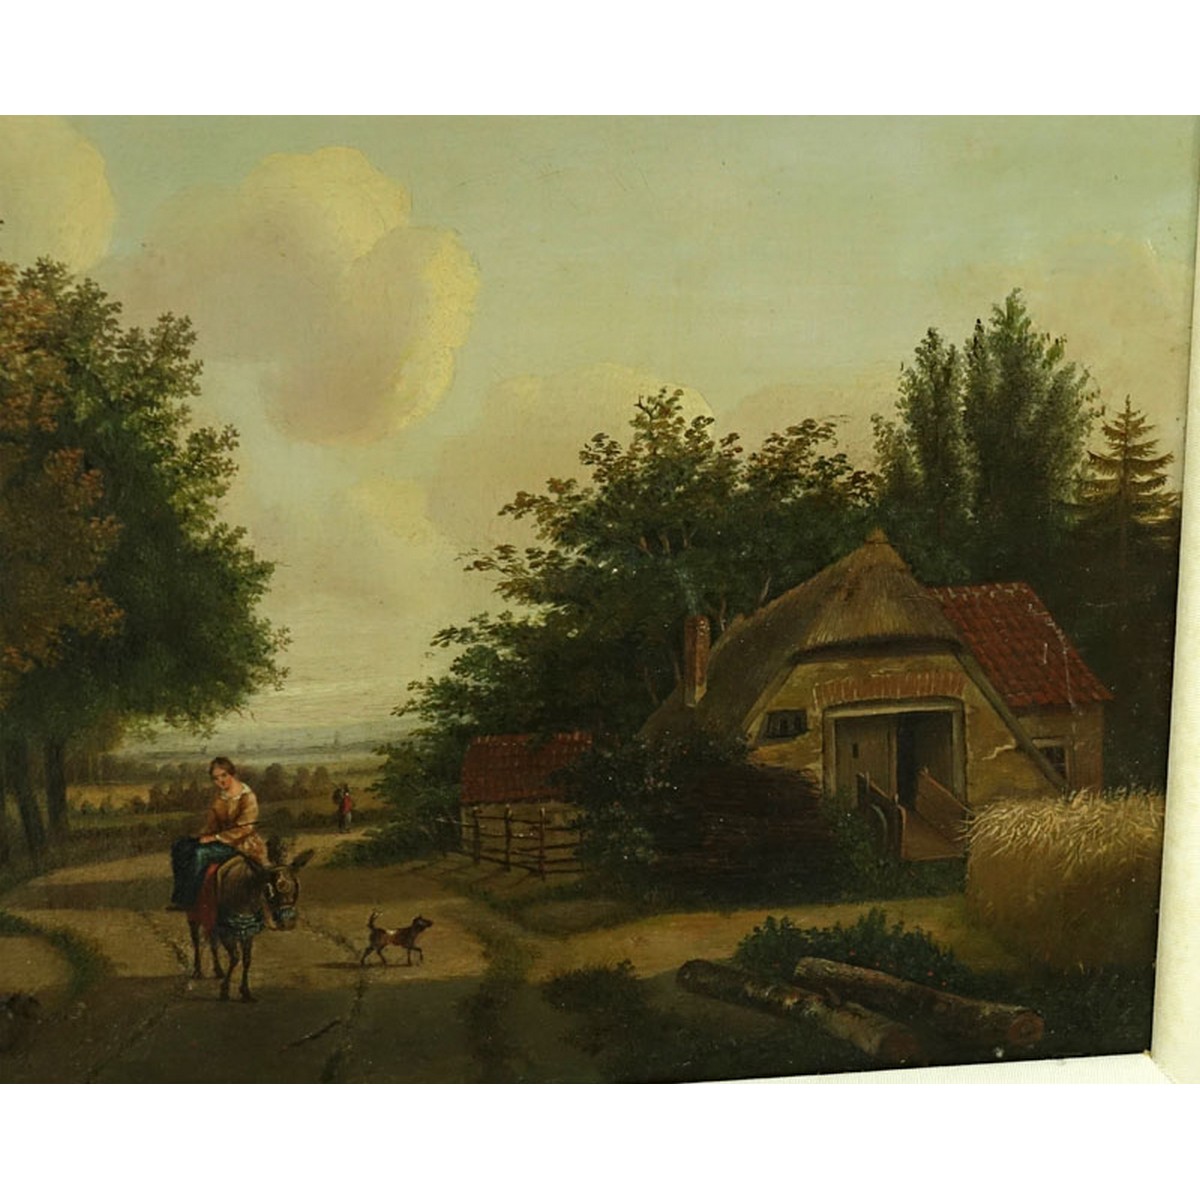 Charles Thomas Dixon (19th C) Oil on canvas "Landscape With Cottage". No visible signature.